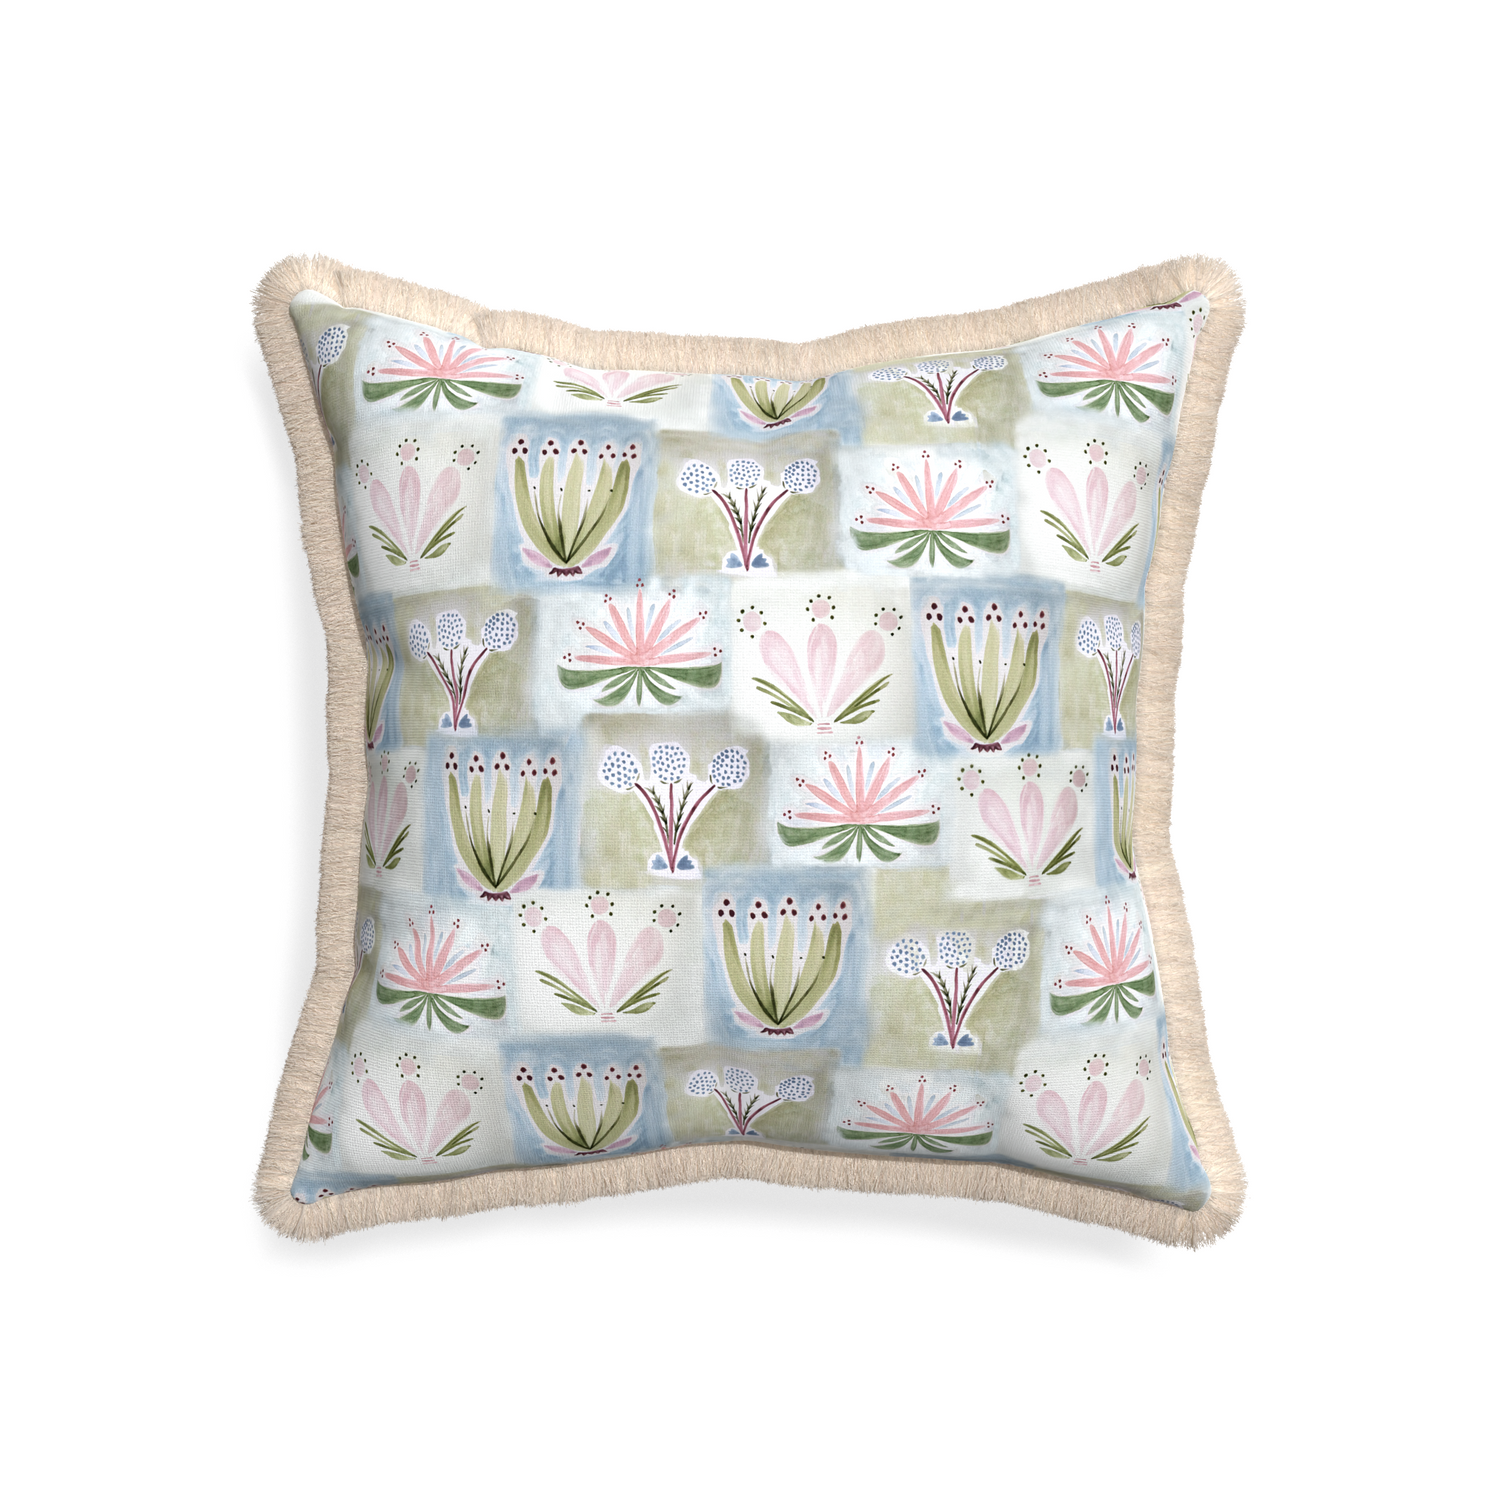 20-square harper custom hand-painted floralpillow with cream fringe on white background